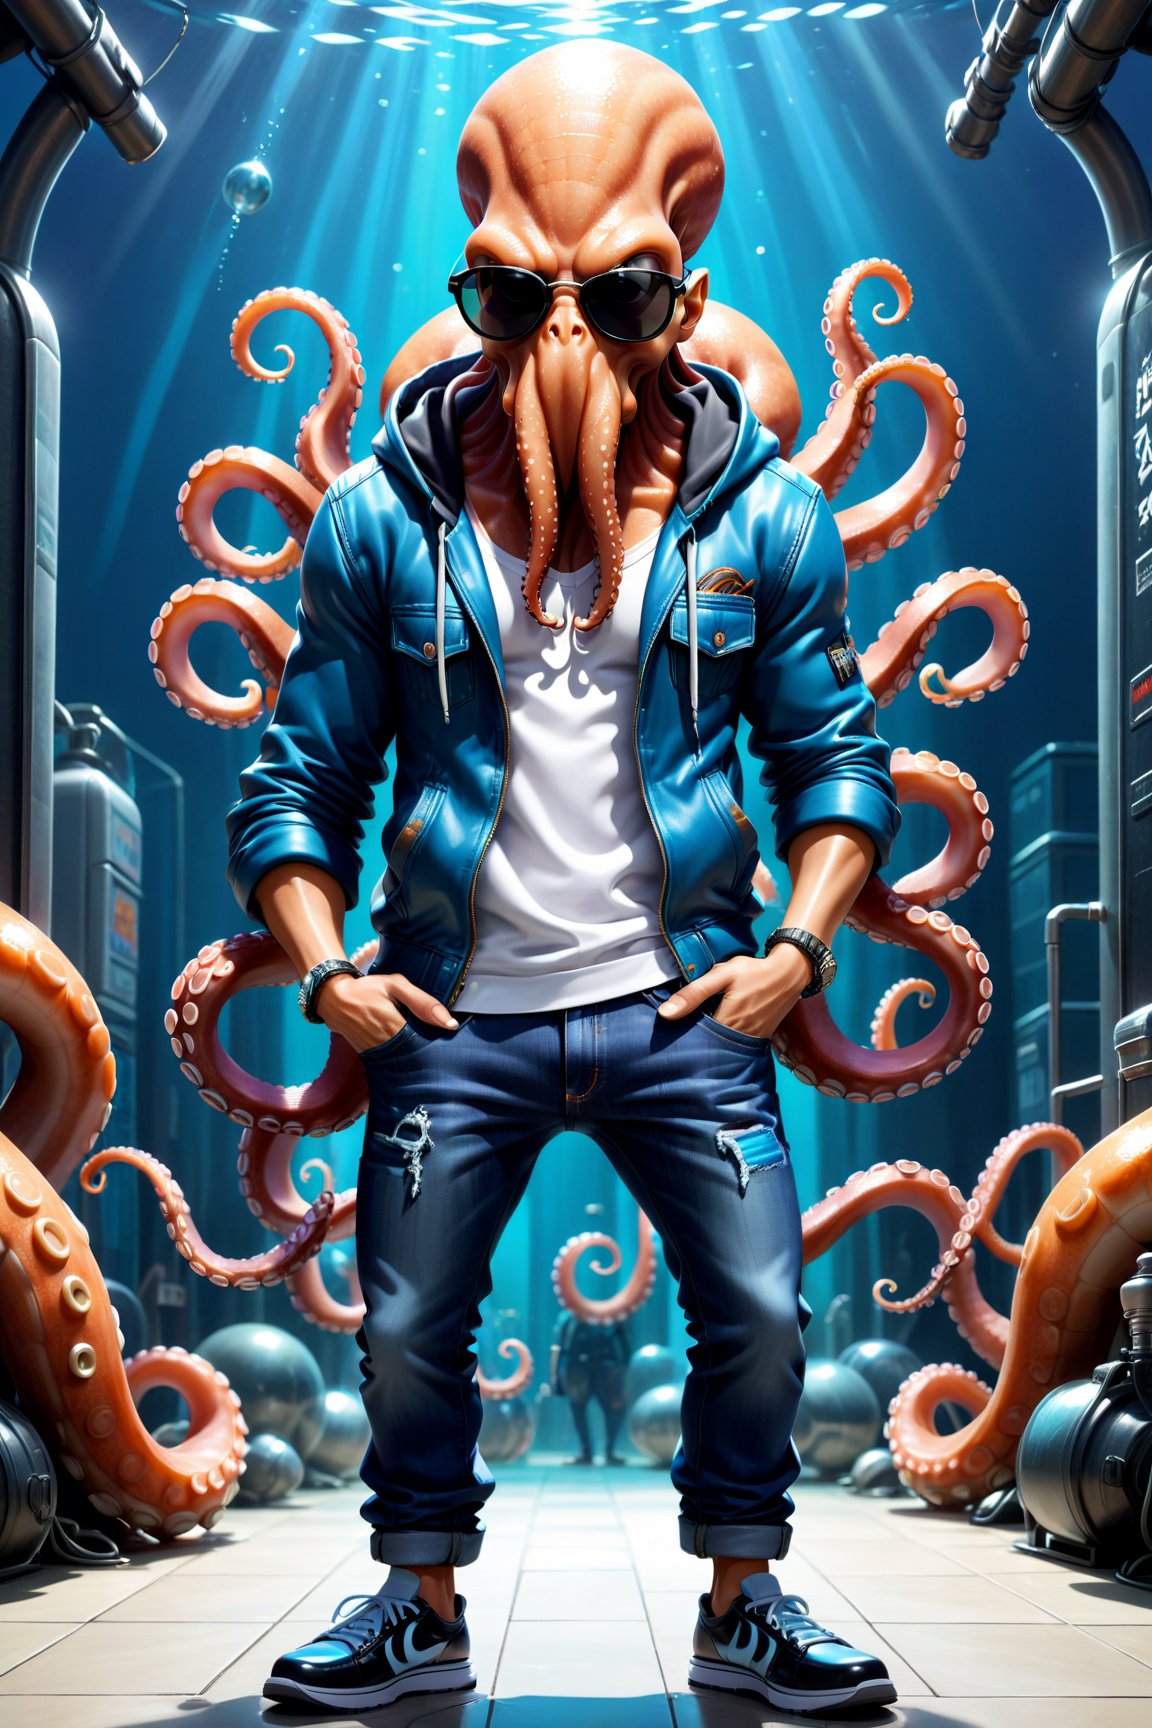 Create a perfect 3D style image of a octopus with a tank top, hooded jacket, jeans, cool sunglasses and shoes. Capture the attitude of this elegant character, with his hands casually placed inside his pants pockets, he must be located in a nightclub